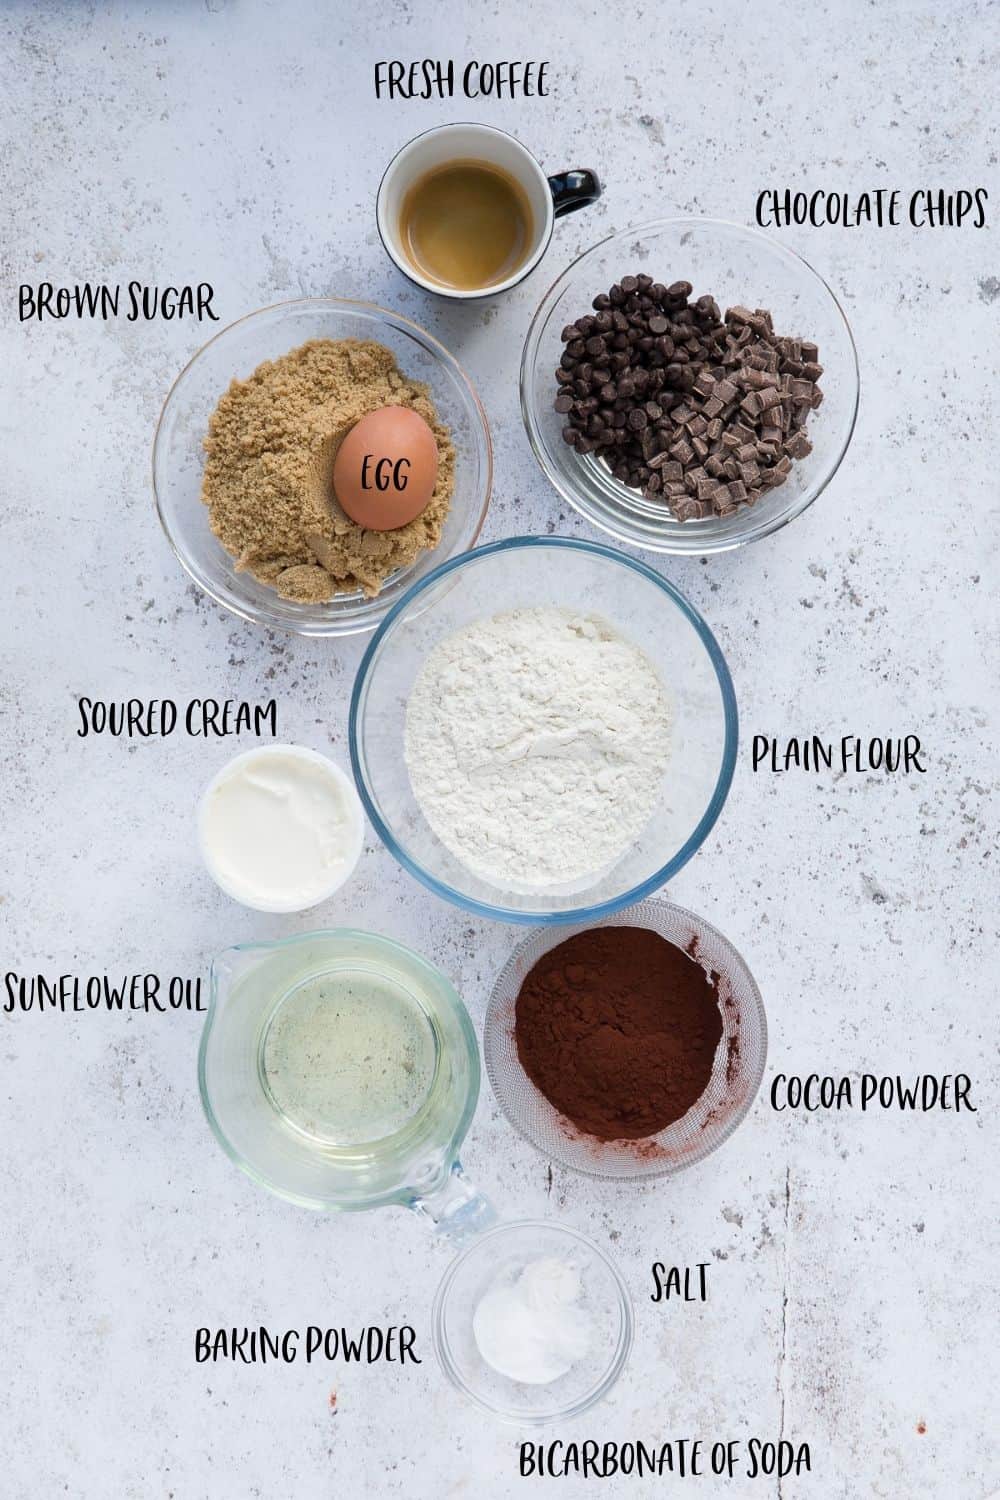 An image showing the following ingredients in glass bowls: fresh coffee, chocolate chips, brown sugar, egg, plain flour, soured cream, sunflower oil, cocoa powder, baking powder, salt and bicarbonate of soda. 